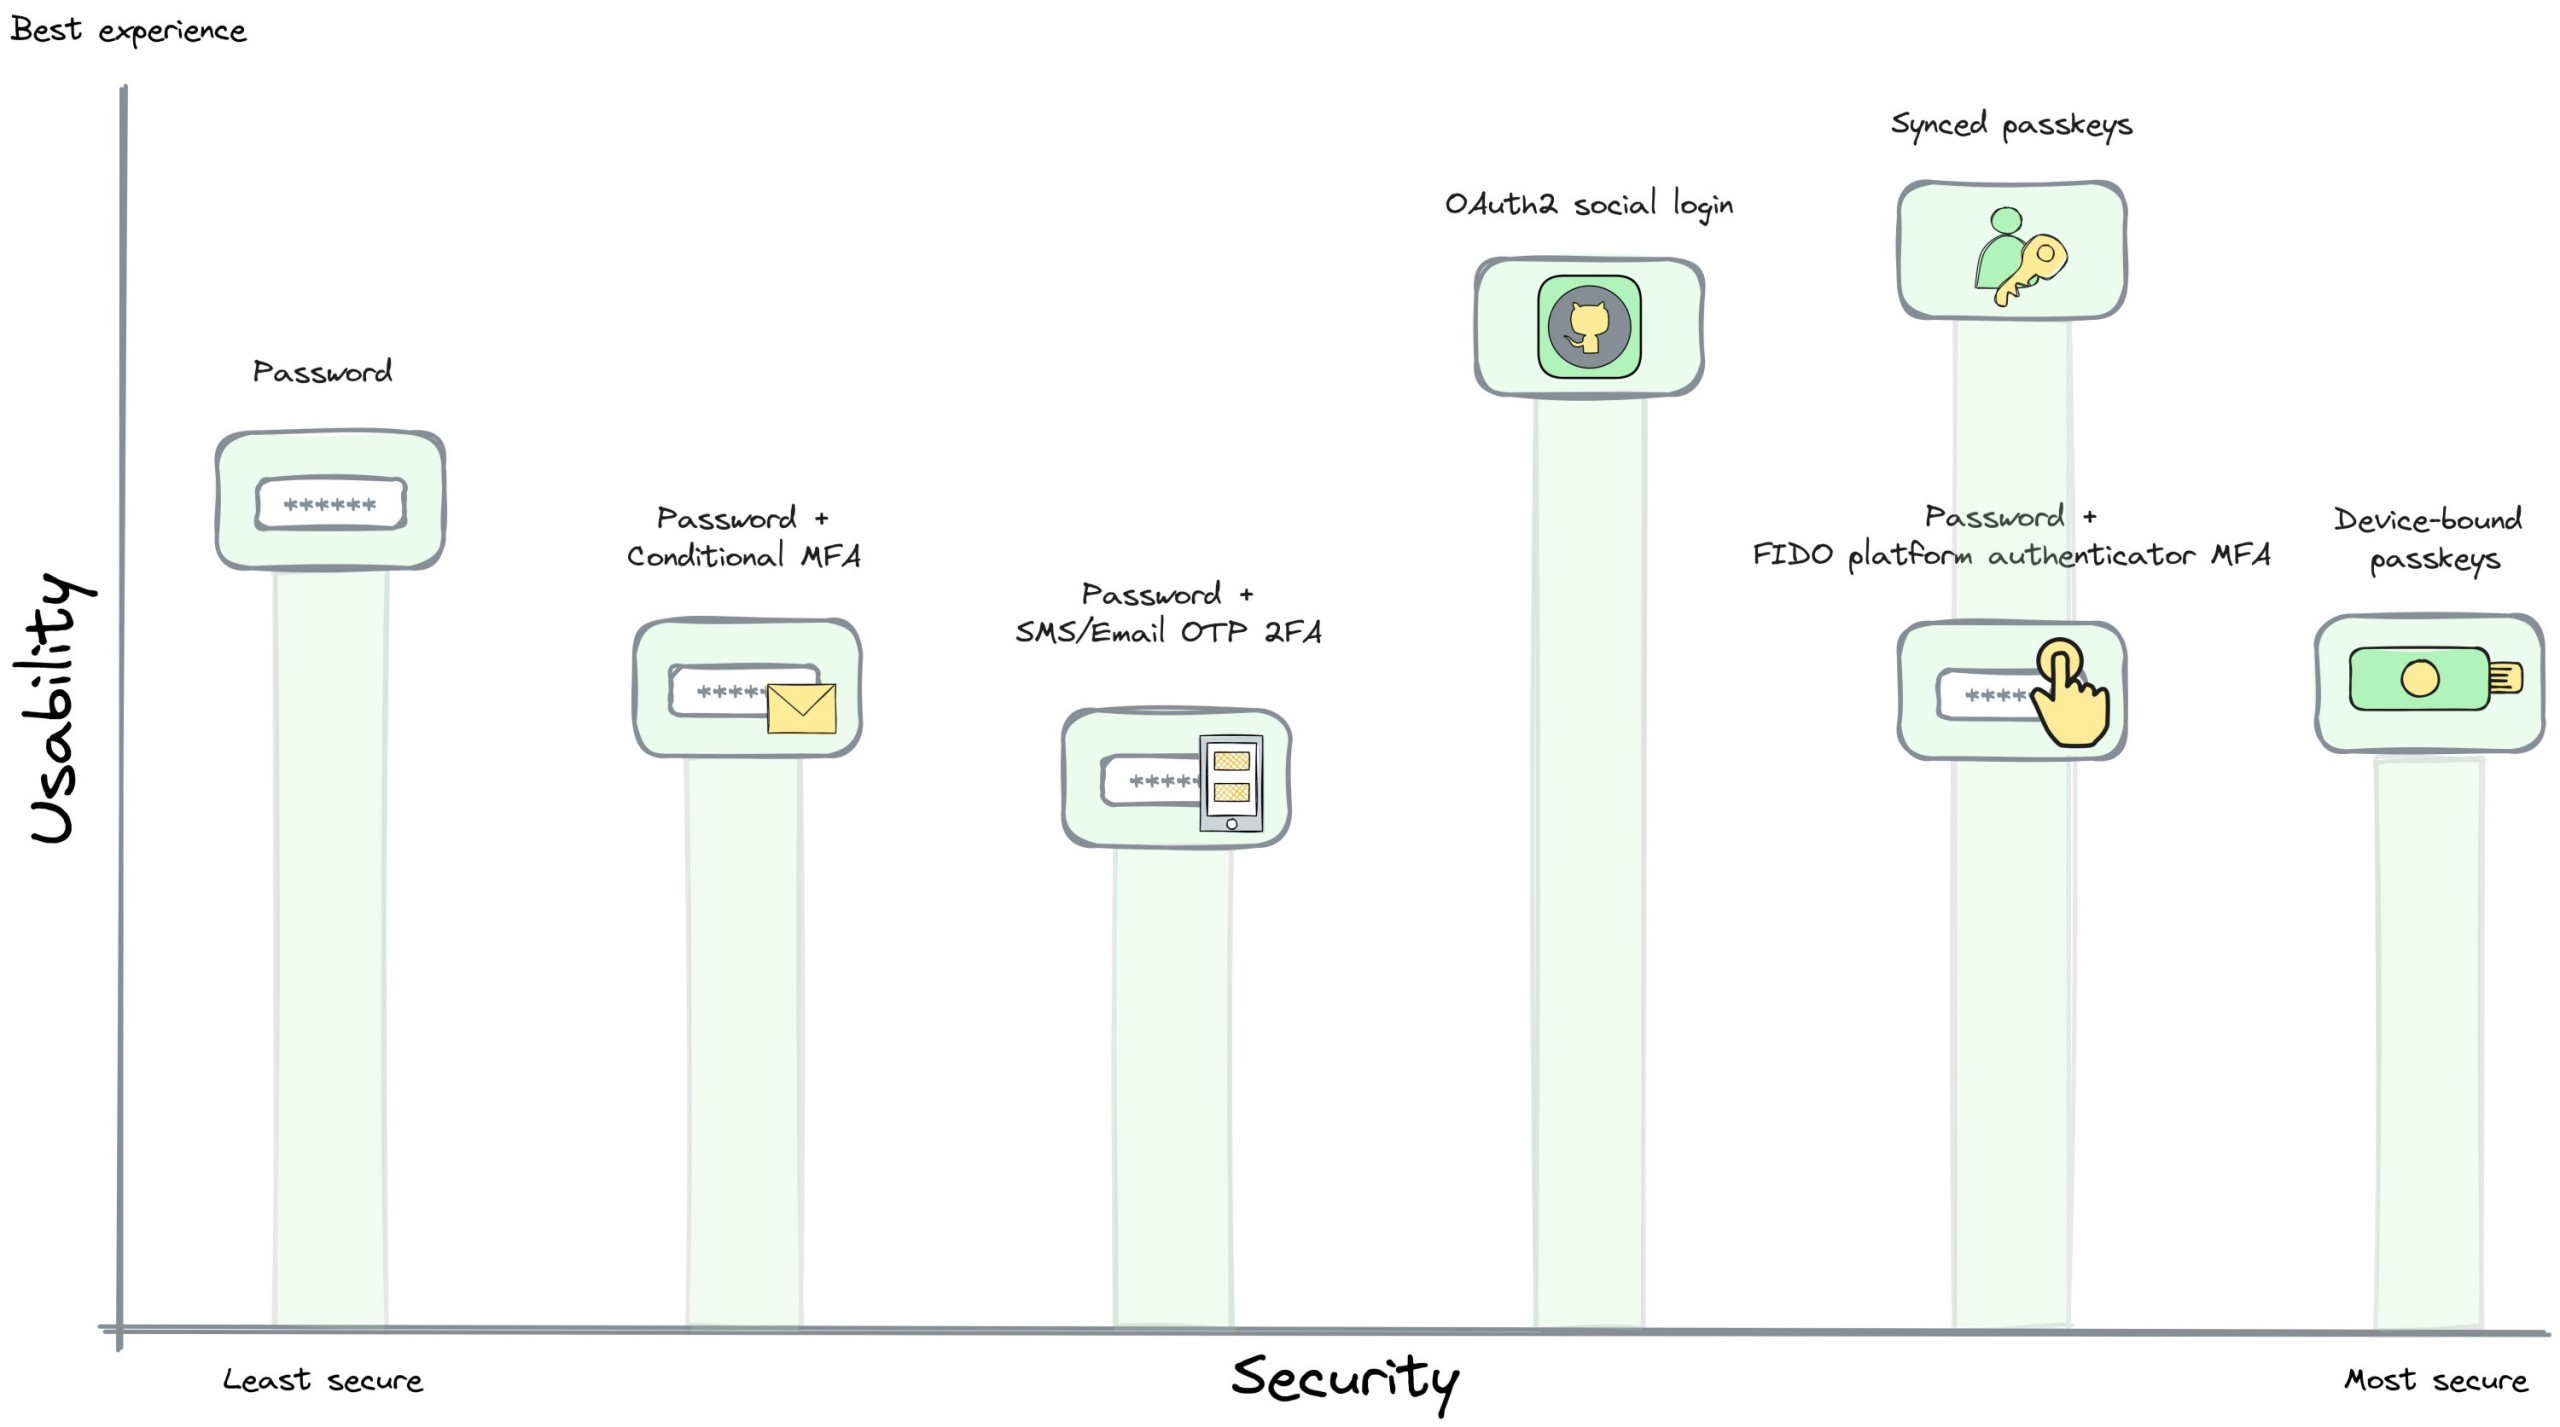 Security and usability spectrum of passkeys